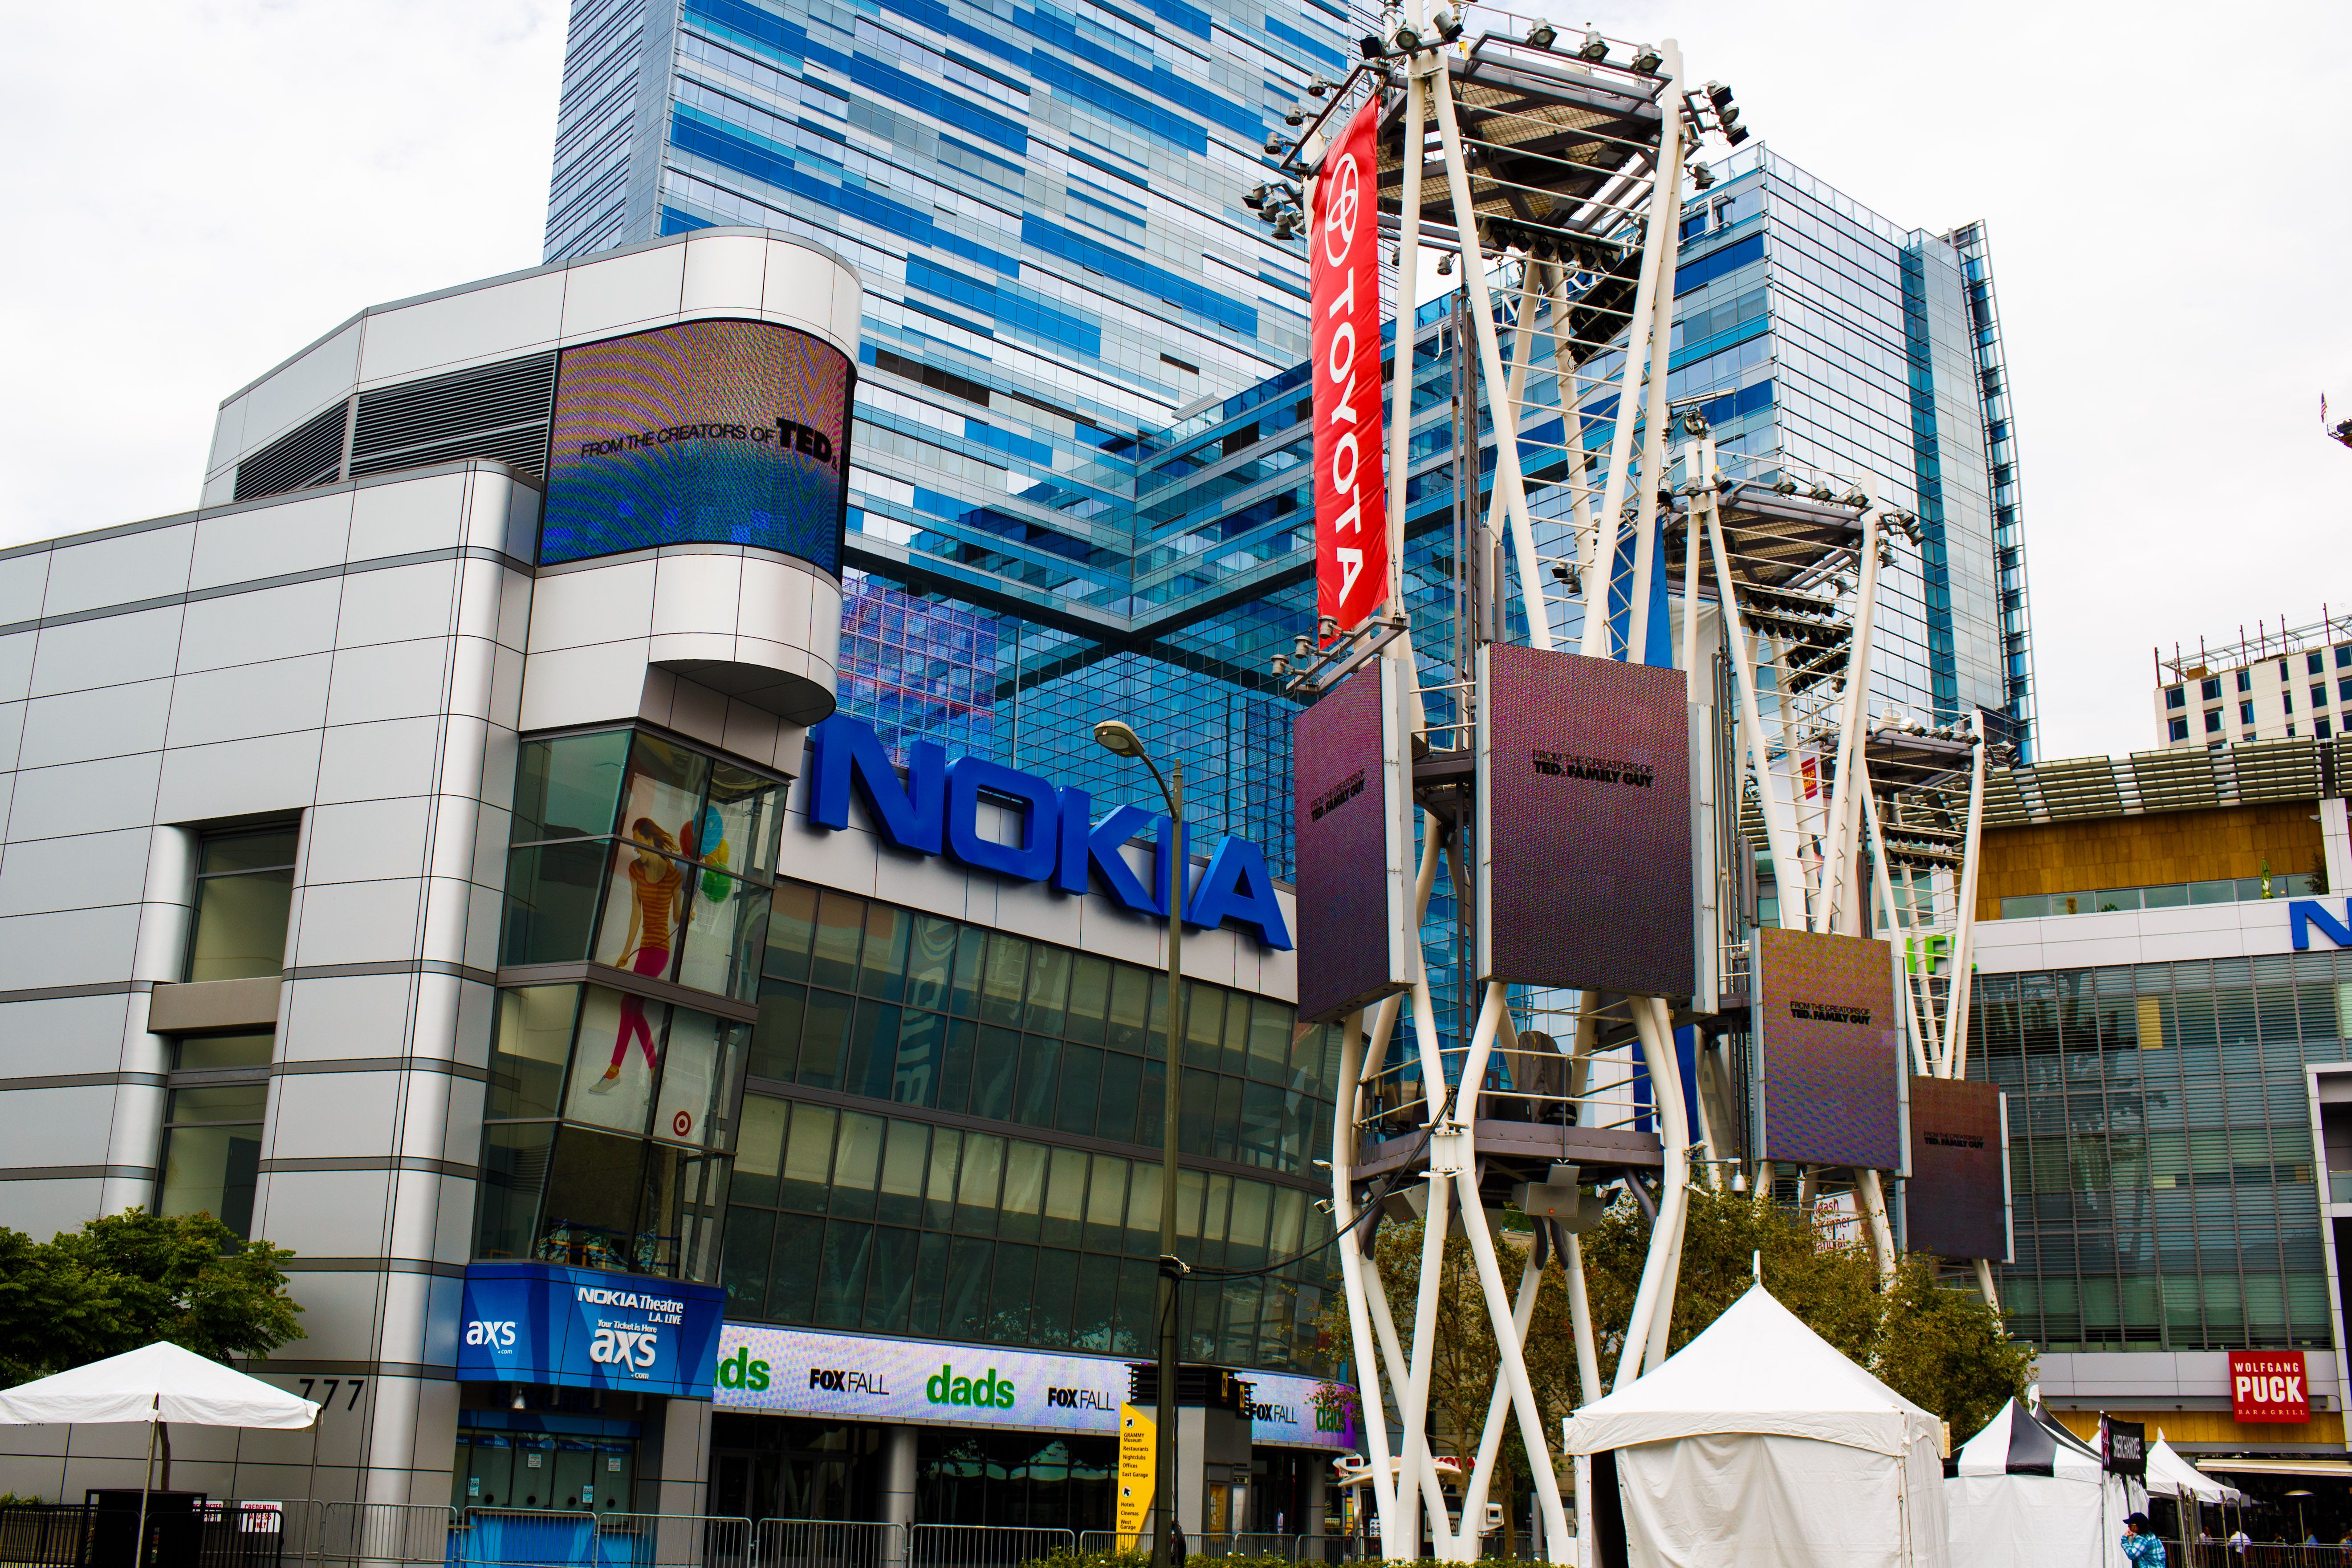 The Nokia Center at L.A. Live